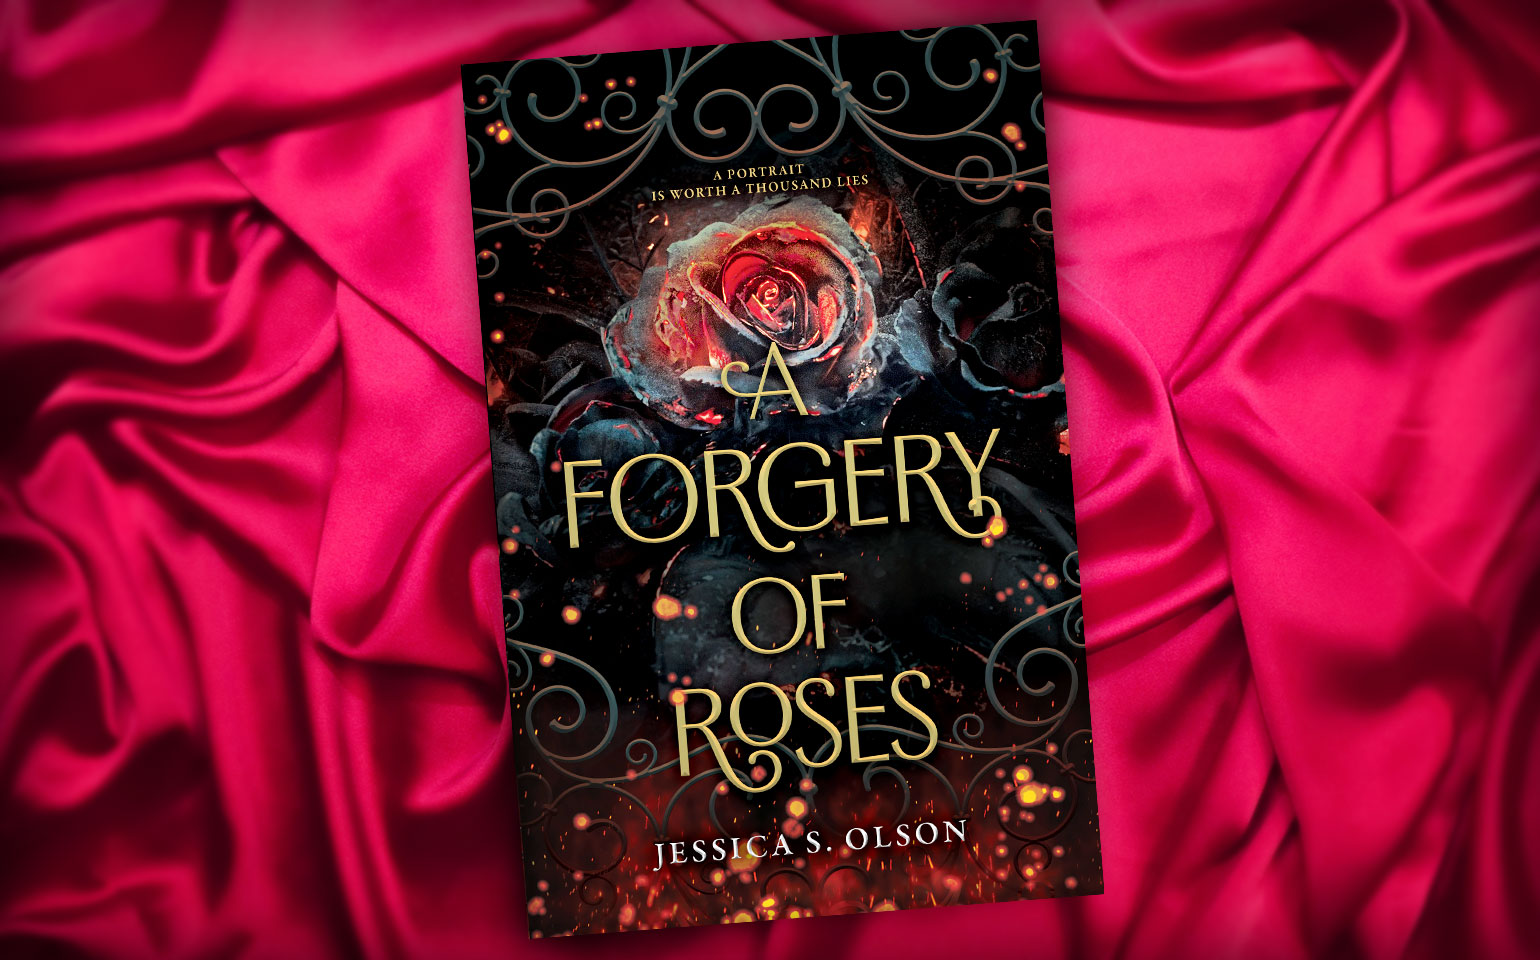 a forgery of rose